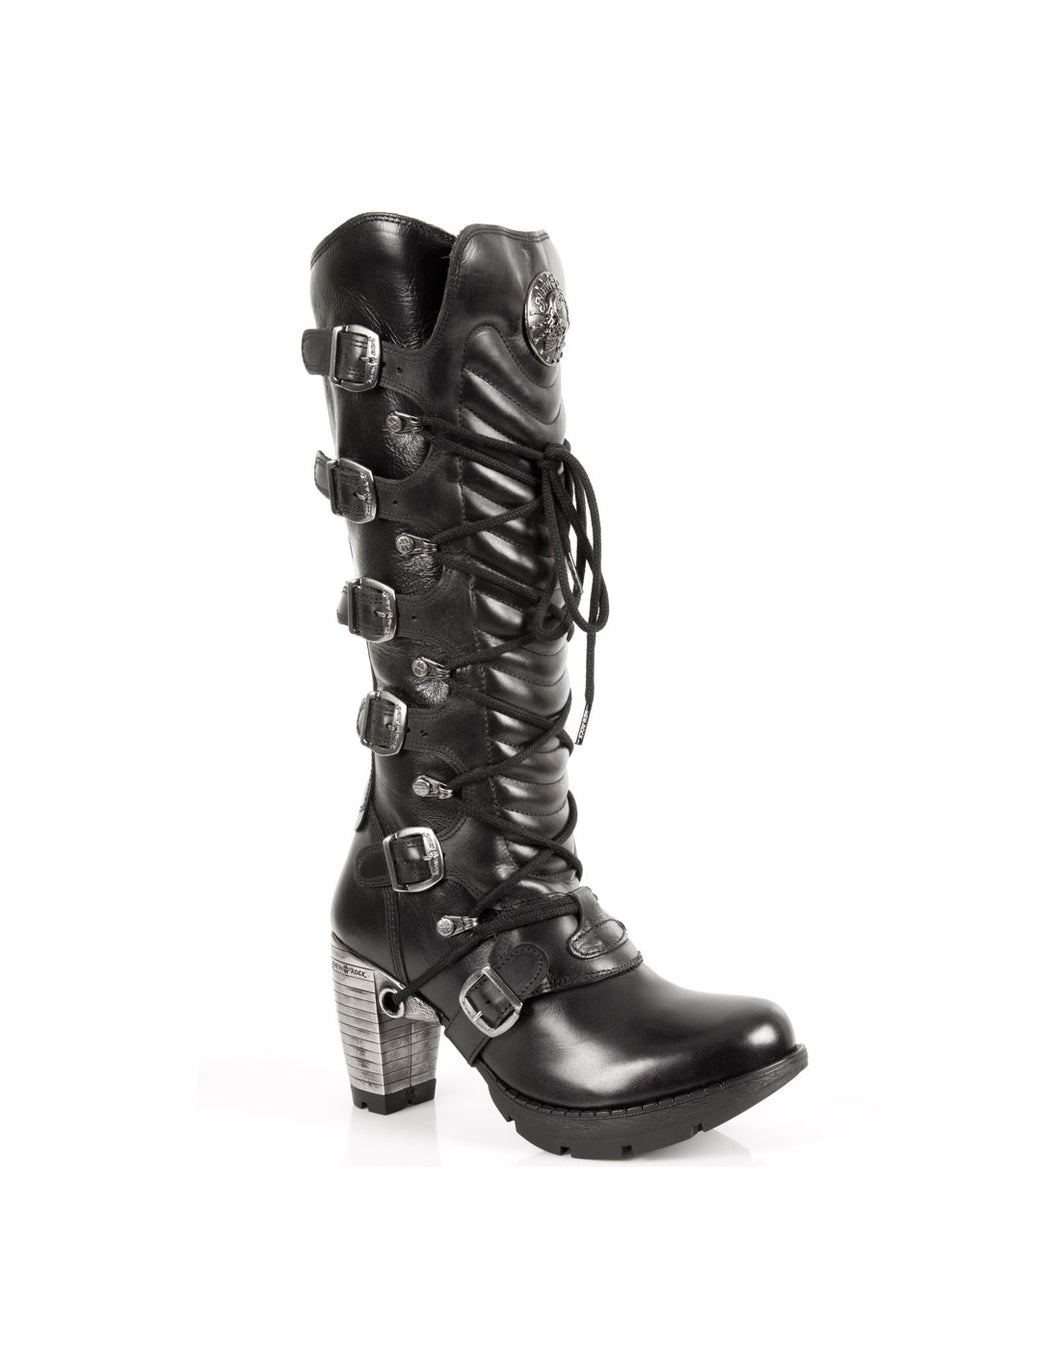 New Rock Shoes Women's Boots Boots Shoes Gothic M.TR004-S1 Buckles